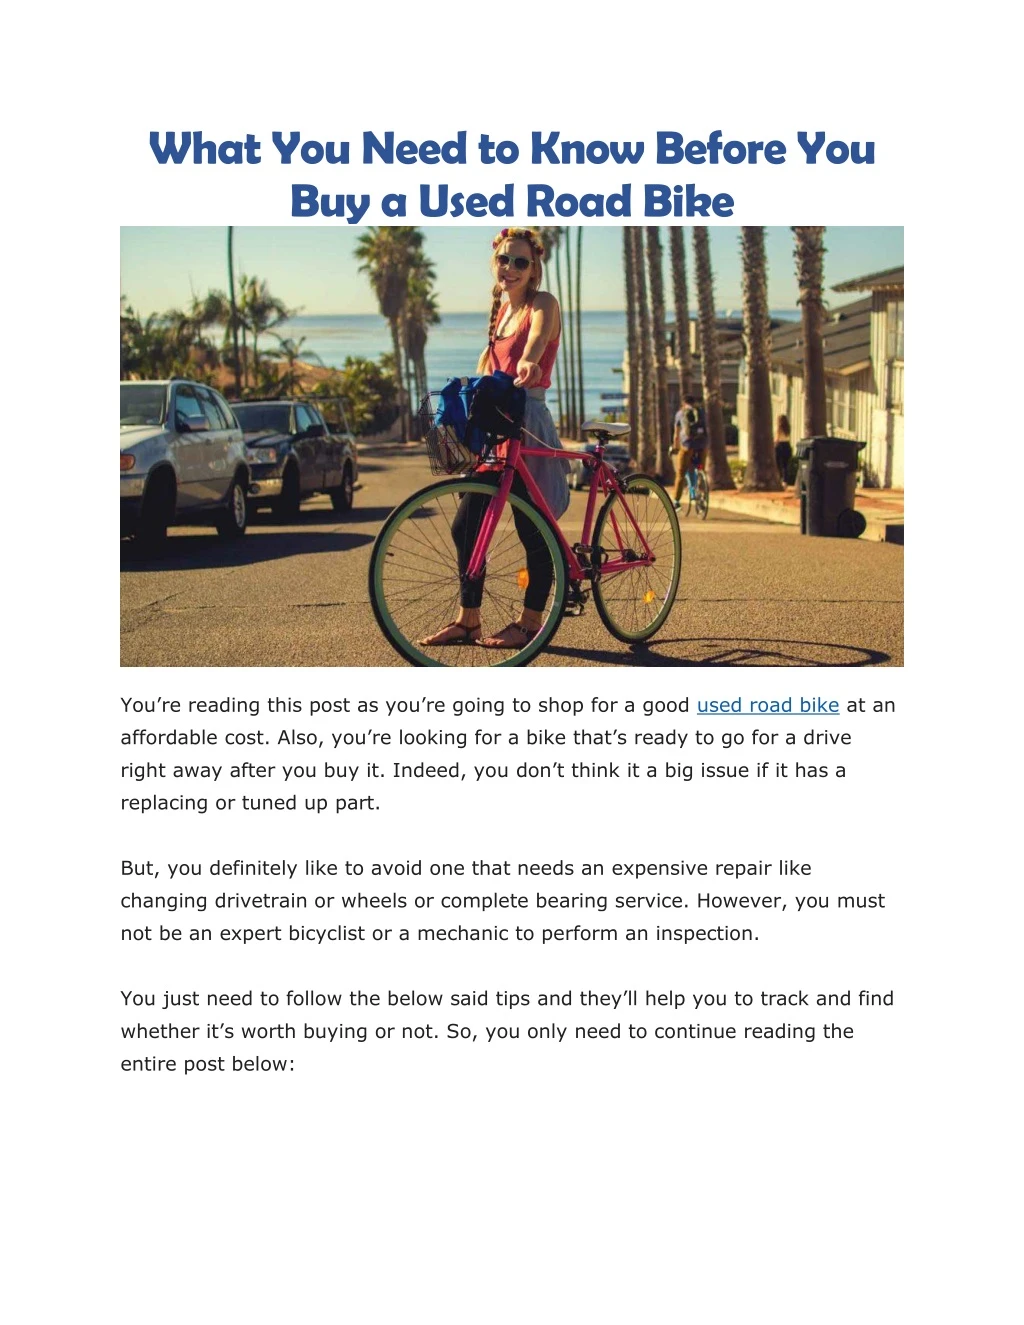 what you need to know before you buy a used road